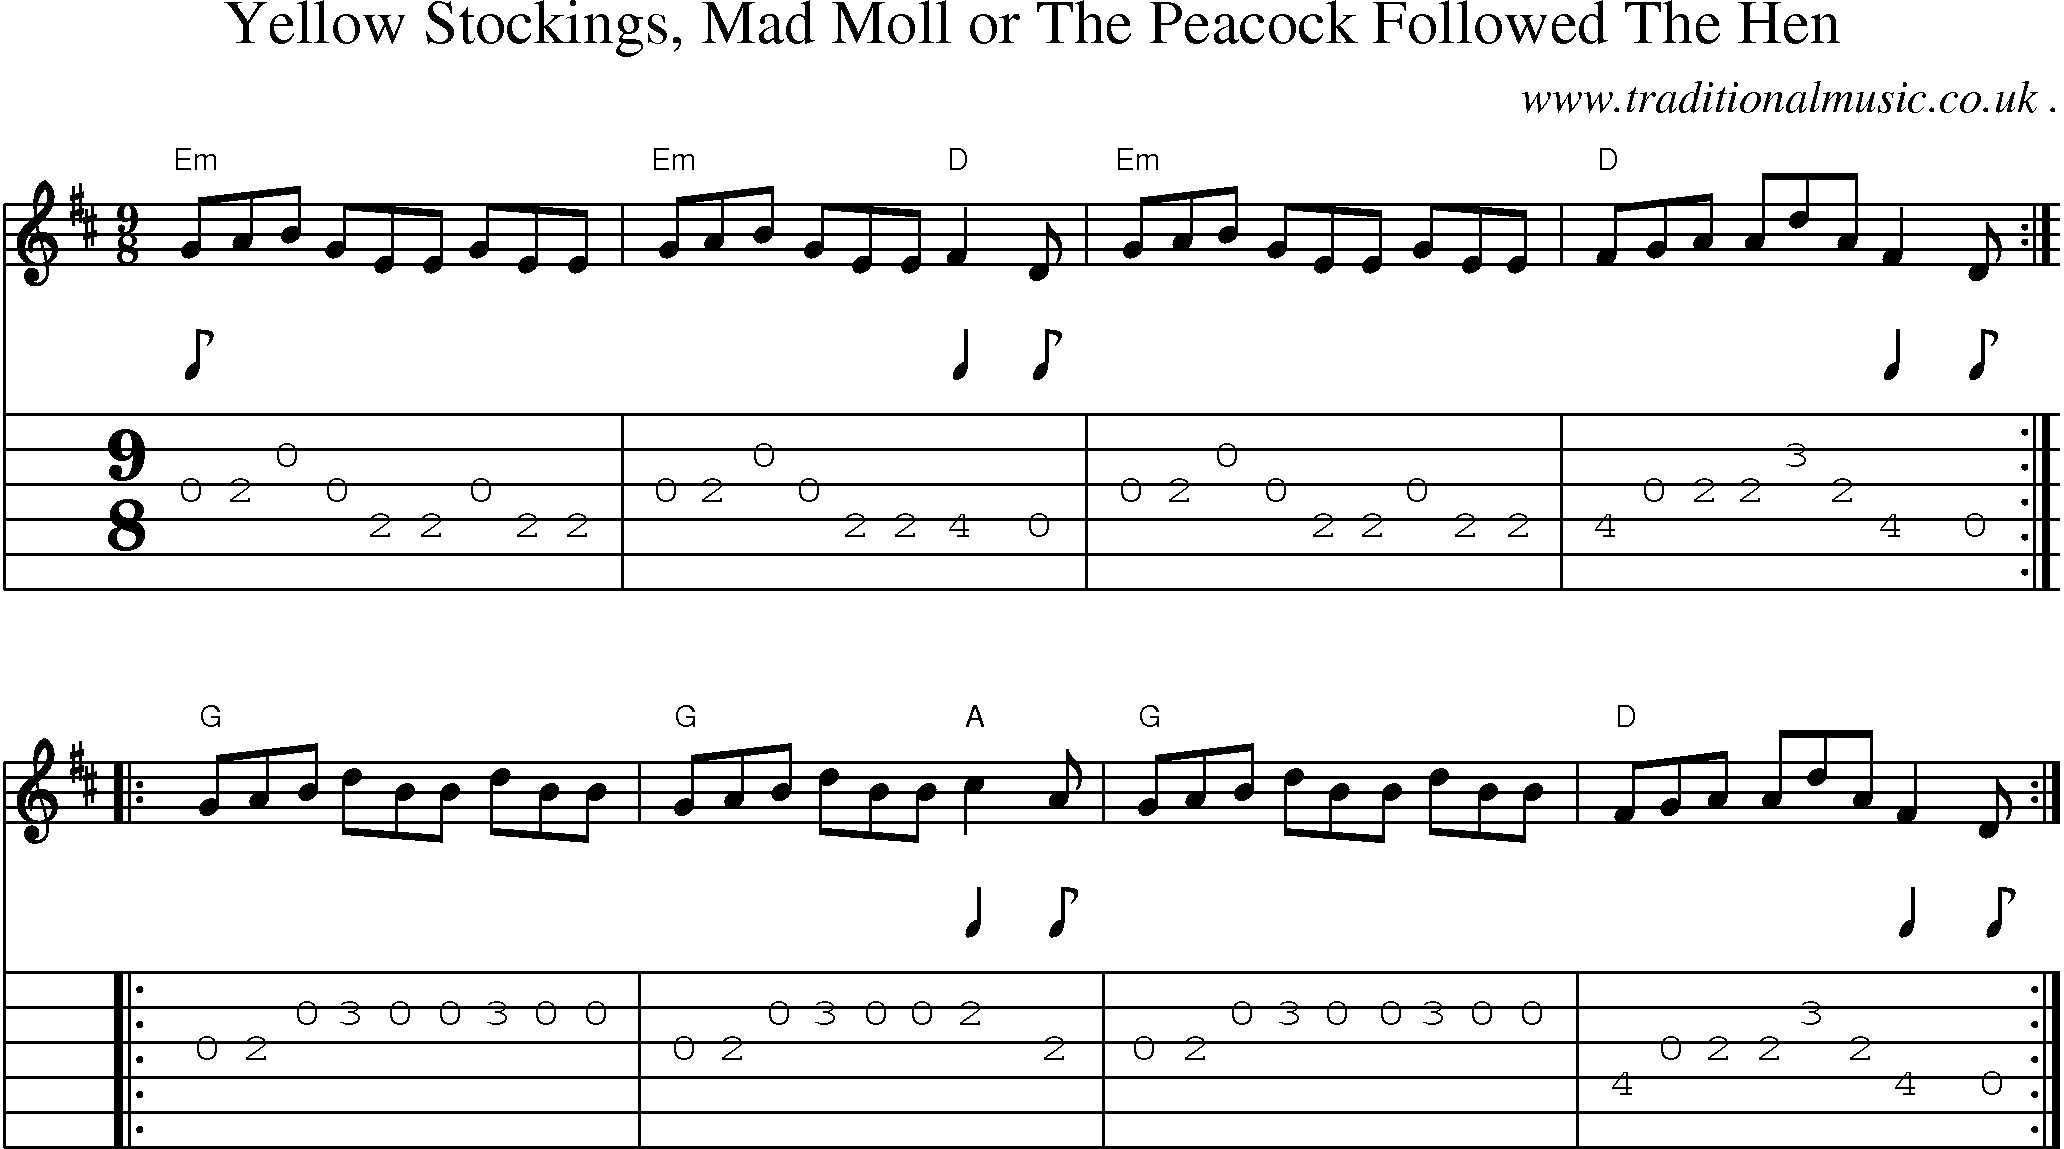 Sheet-Music and Guitar Tabs for Yellow Stockings Mad Moll Or The Peacock Followed The Hen